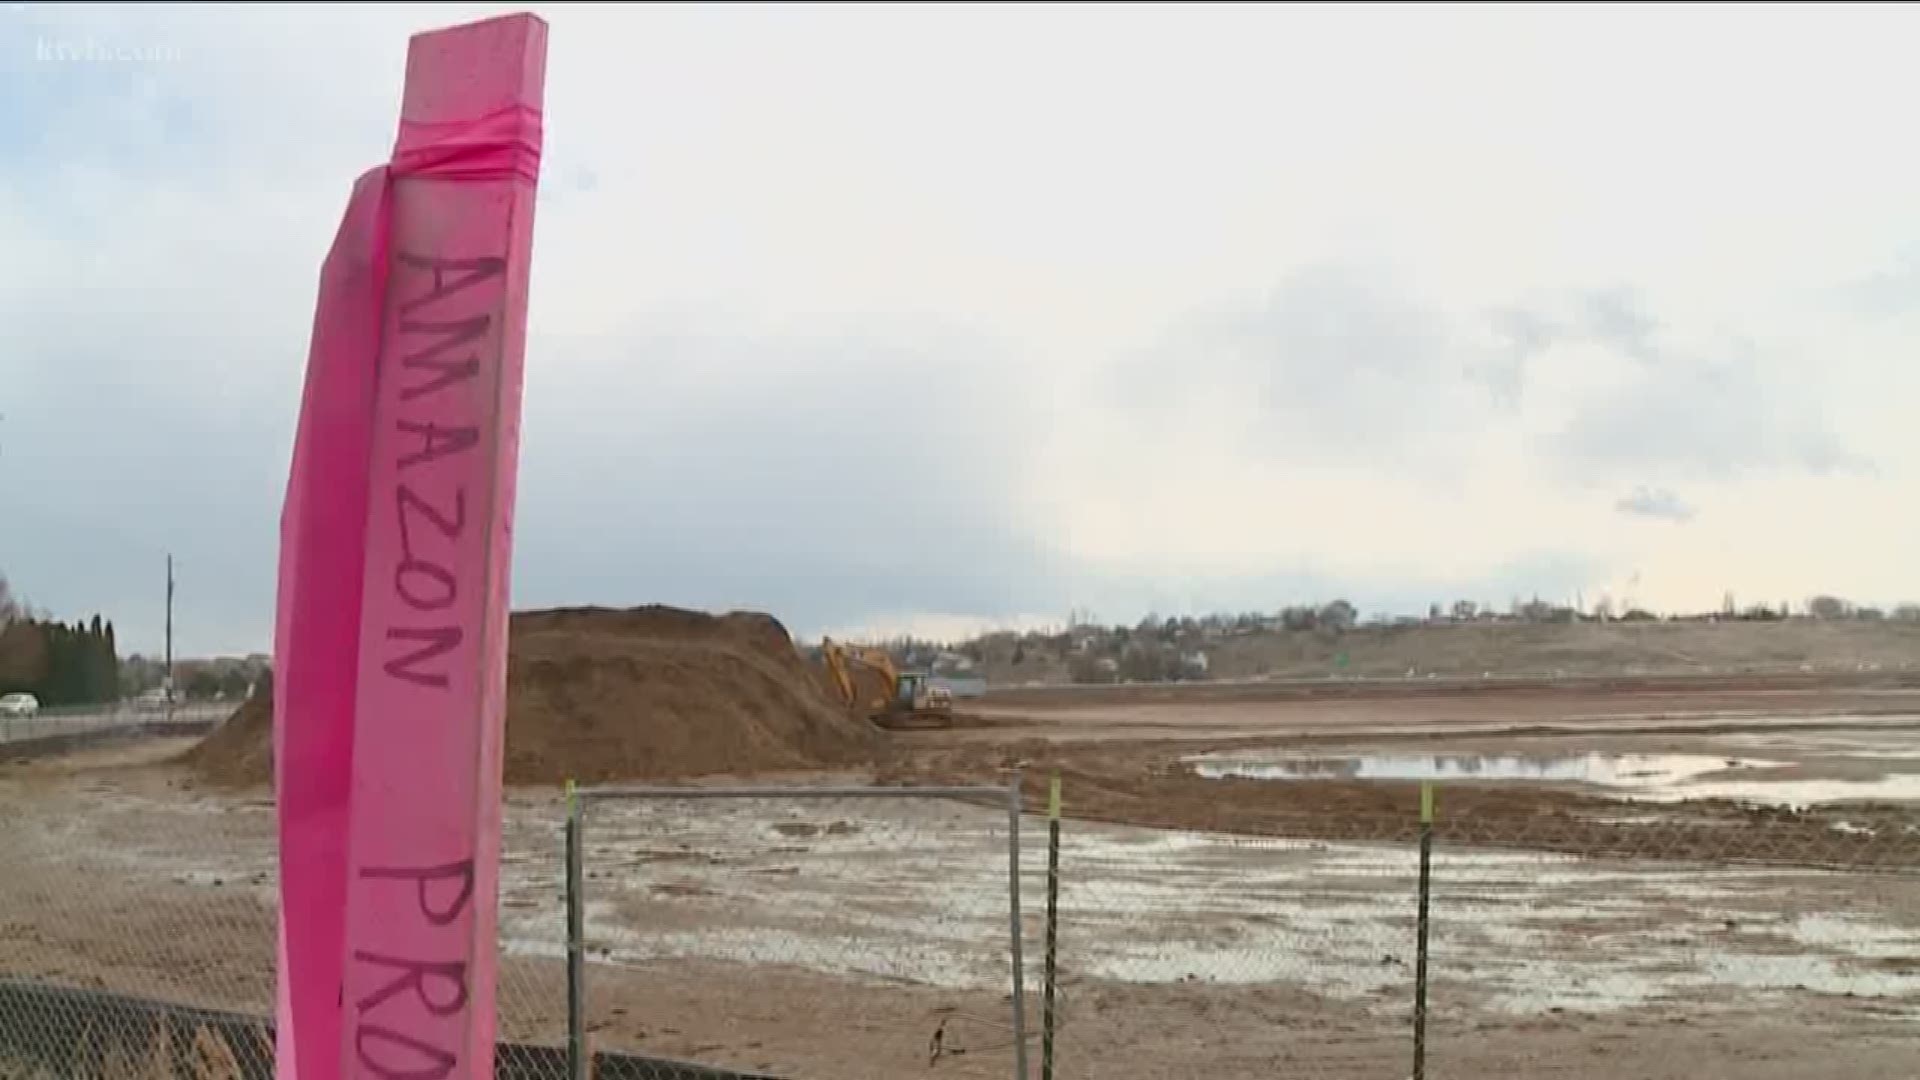 Construction of the large warehouse off of Star and Franklin roads was supposed to start "immediately," according to Nampa Mayor Debbie Kling, but has now been delayed, possibly for several months.